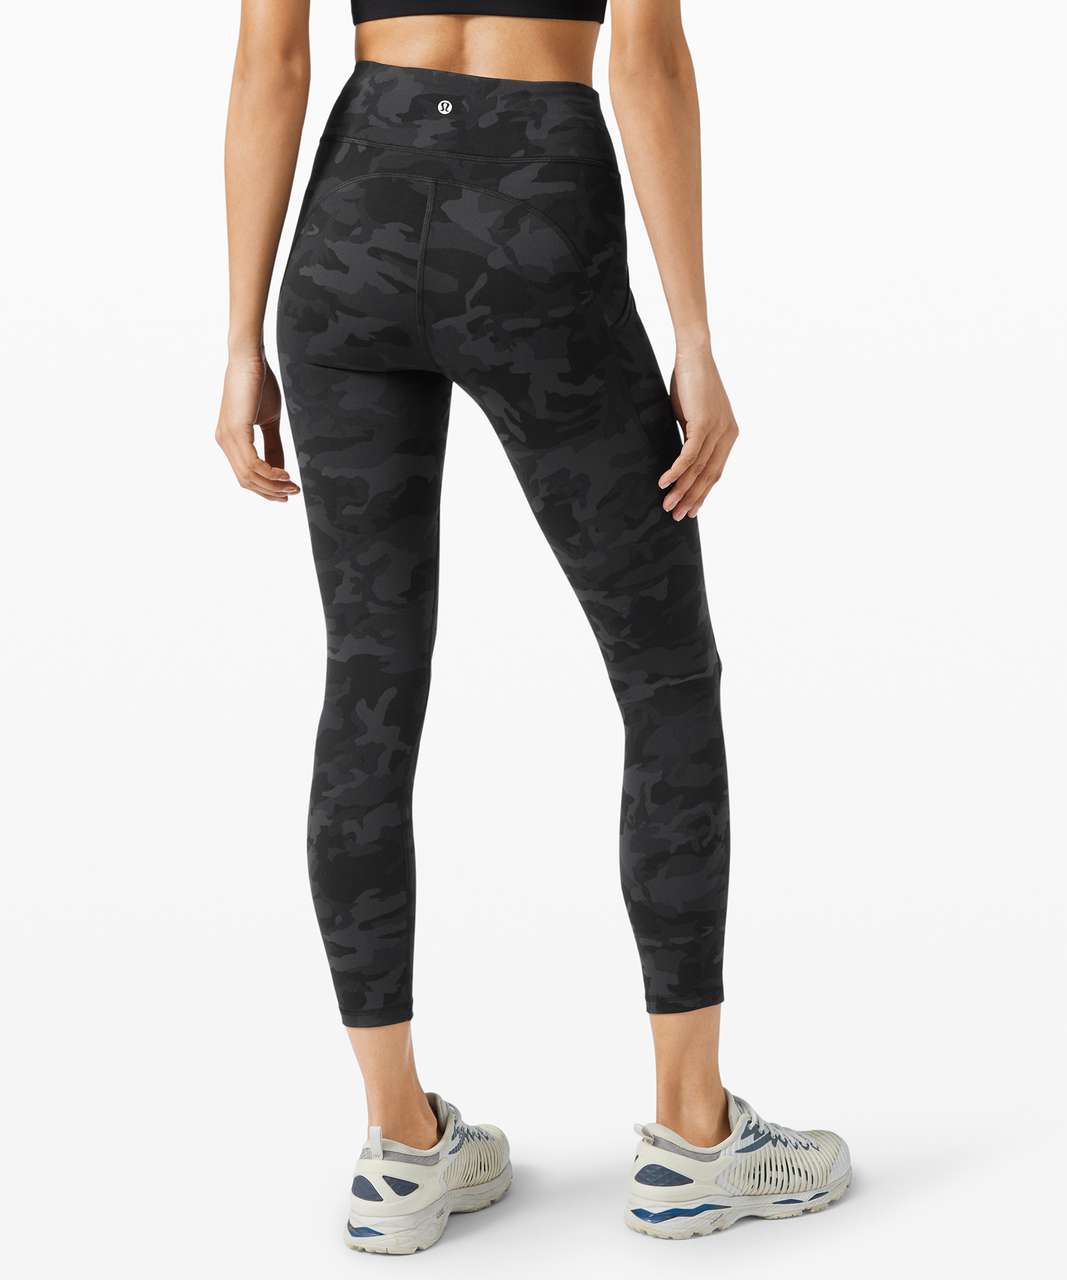 Lululemon Align Pant 25 Incognito Camo Multi Grey-Size 12-Like New -  clothing & accessories - by owner - craigslist